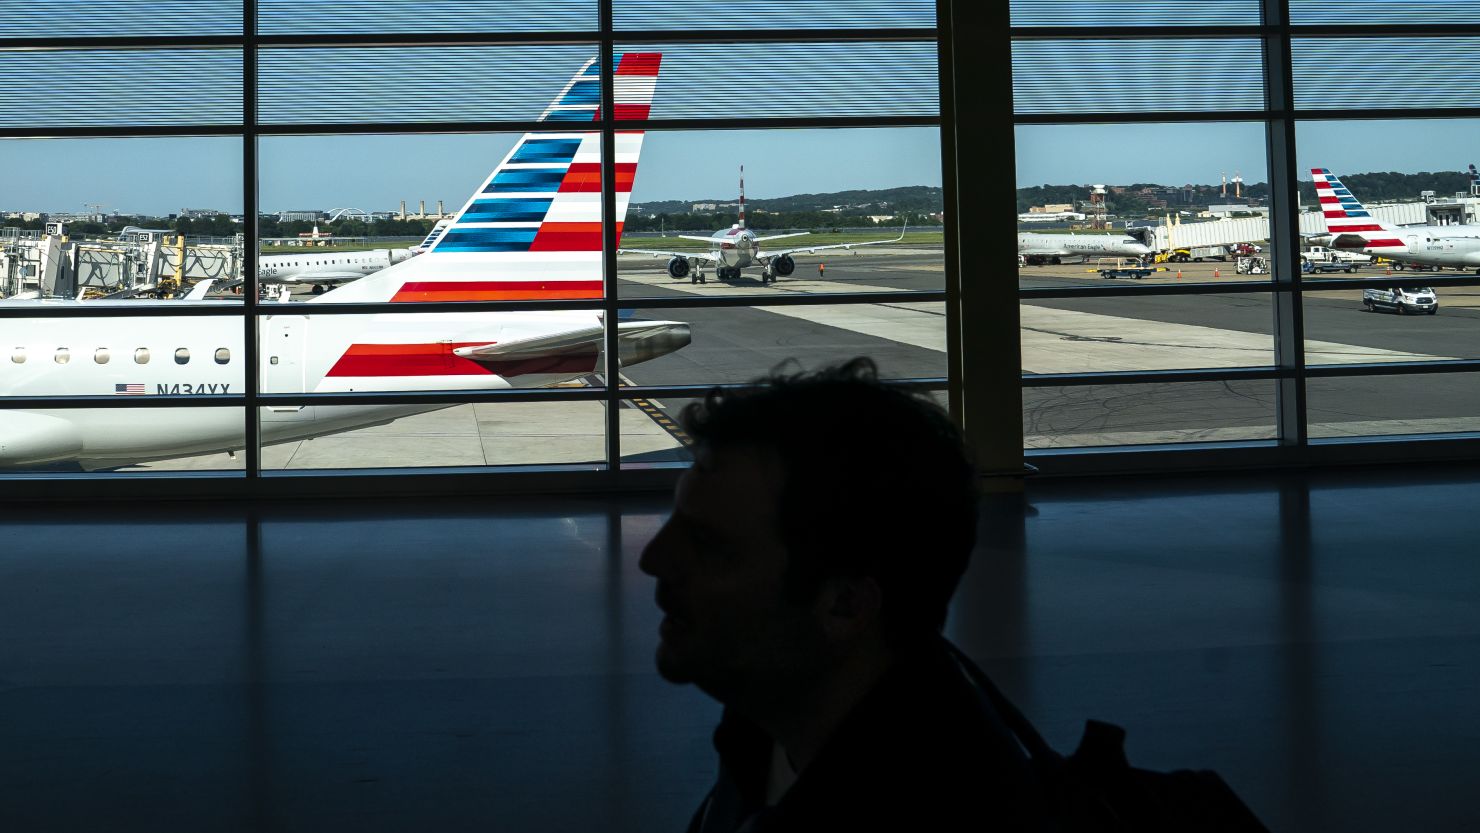 ARLINGTON, VA - JULY 11: A traveler walks past American Airlines planes gated at Ronald Regan Washington National Airport on July 11, 2022 in Arlington, Virginia. Staffing shortages, the COVID-19 pandemic and other issues have led to historic levels of disruptions in U.S. air travel. (Photo by Nathan Howard/Getty Images)